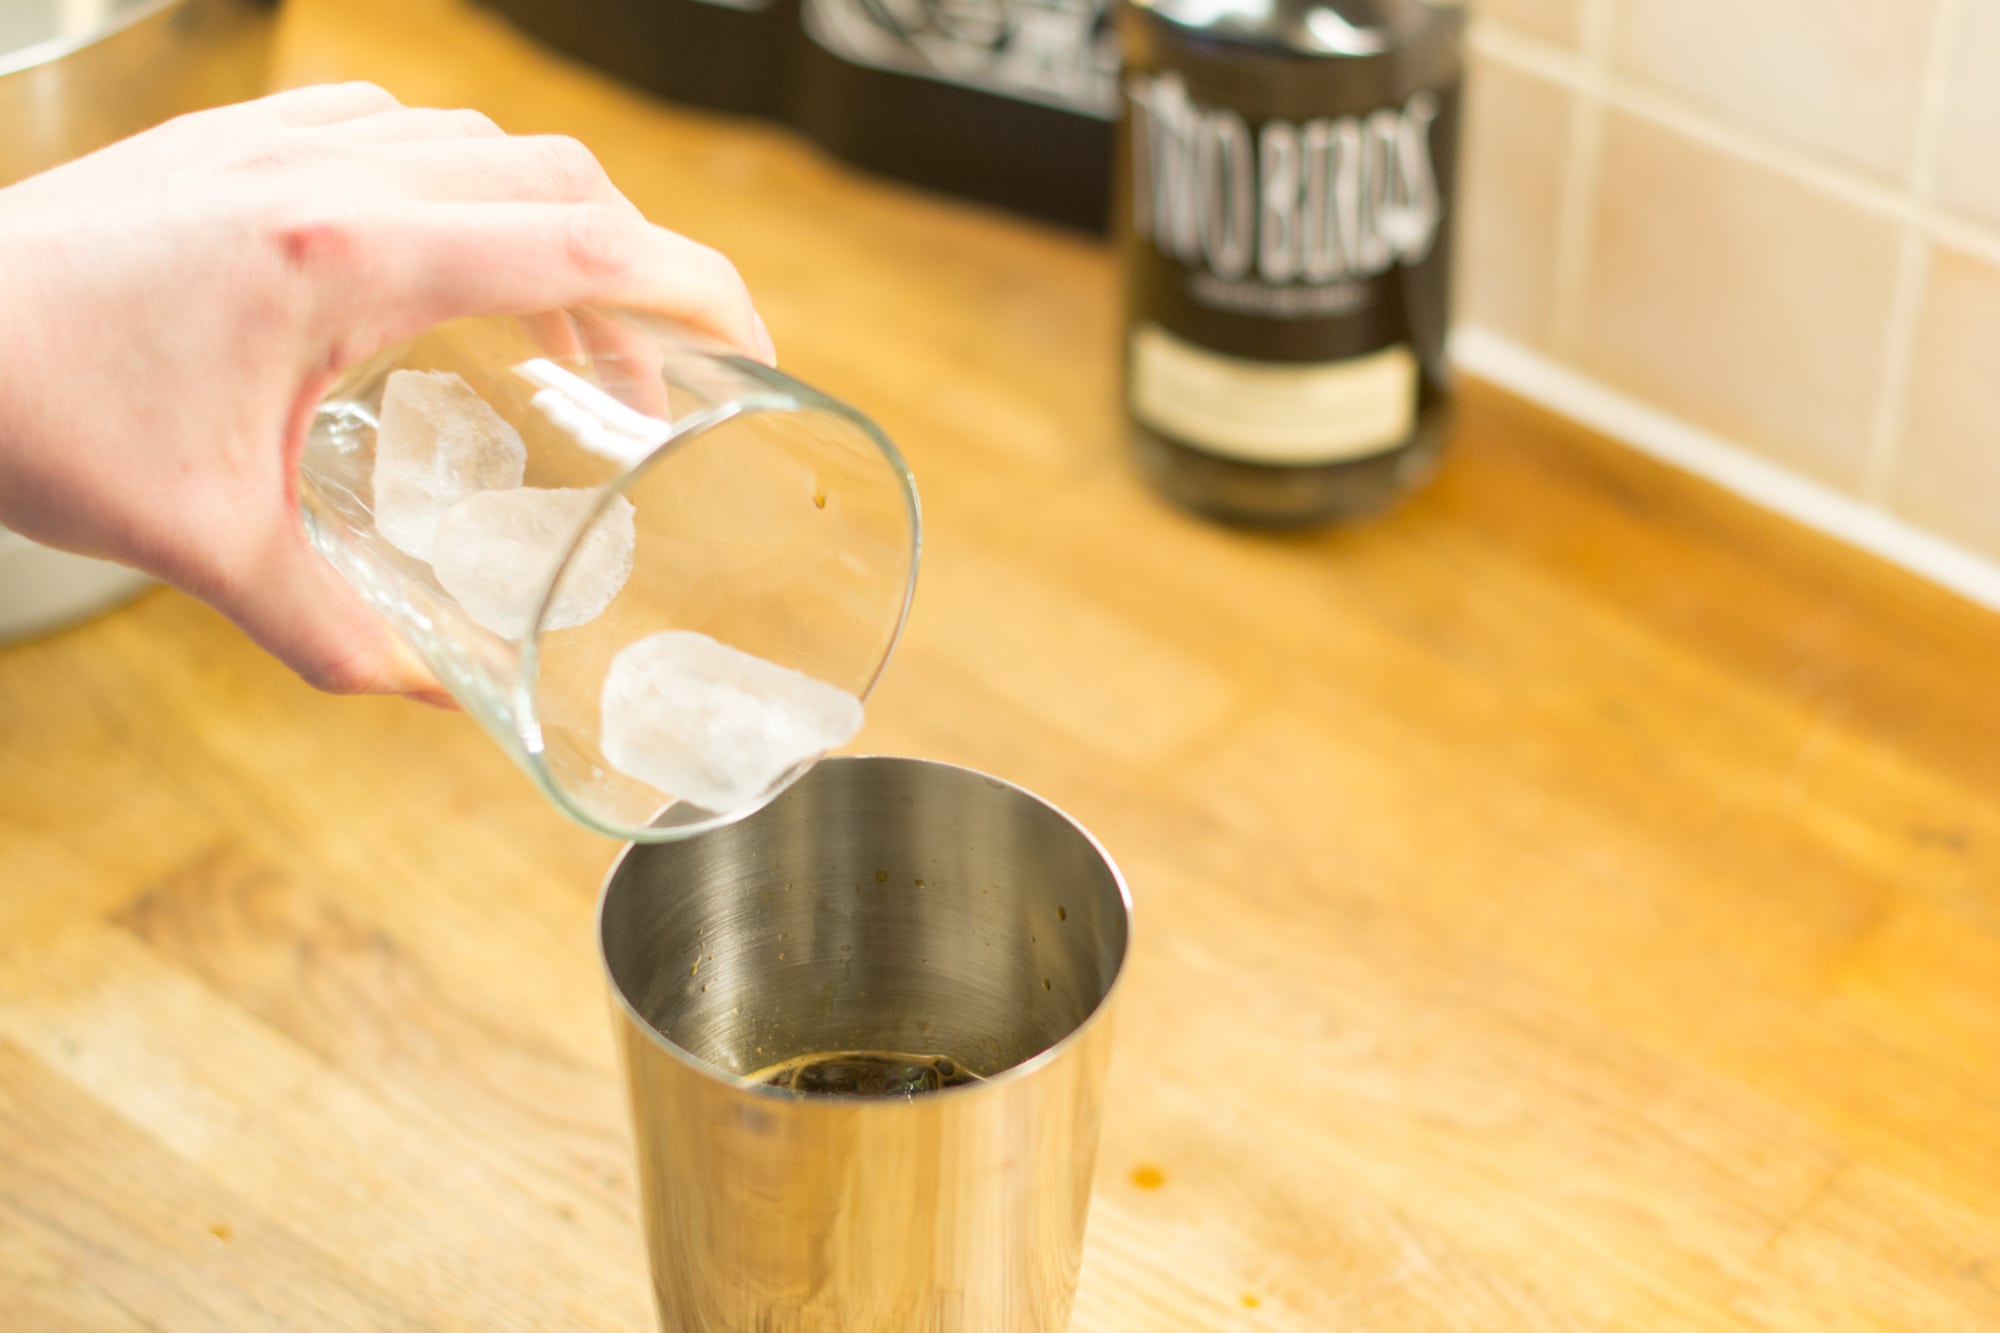 Adding some ice to the cocktail shaker